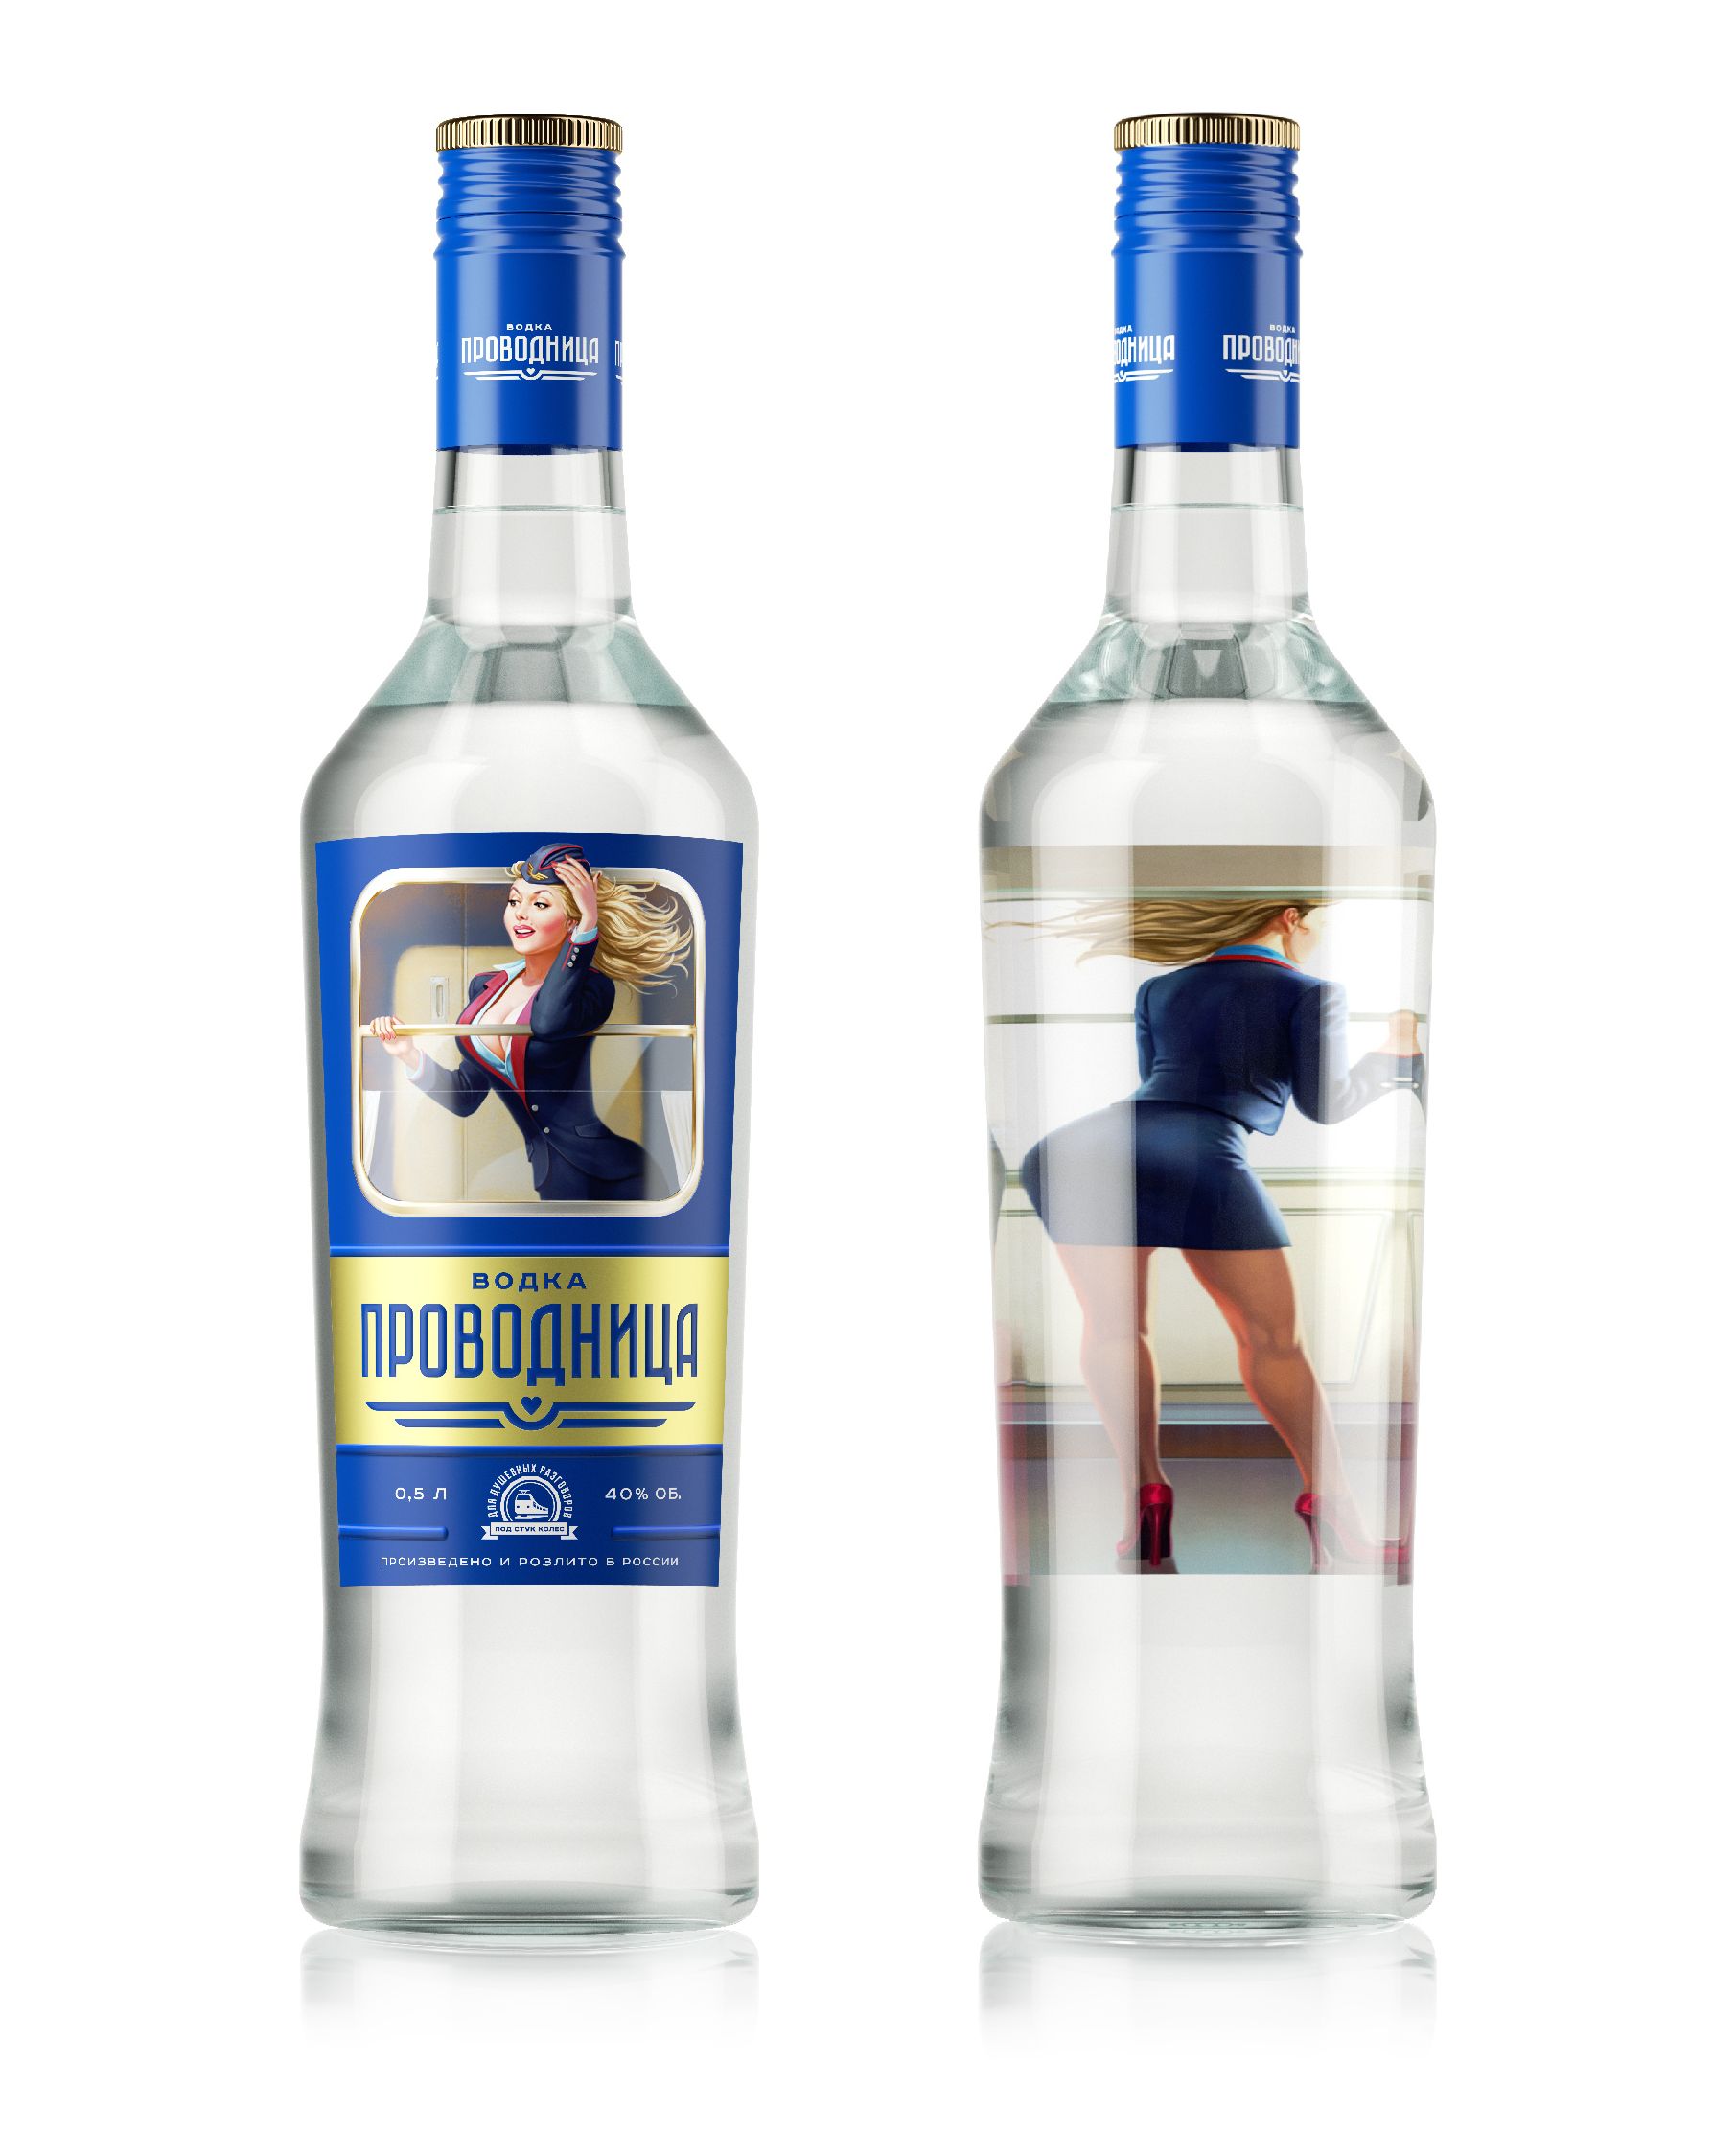 Provocative Railway Aesthetics for Russian Vodka Named after the Carriage Attendants